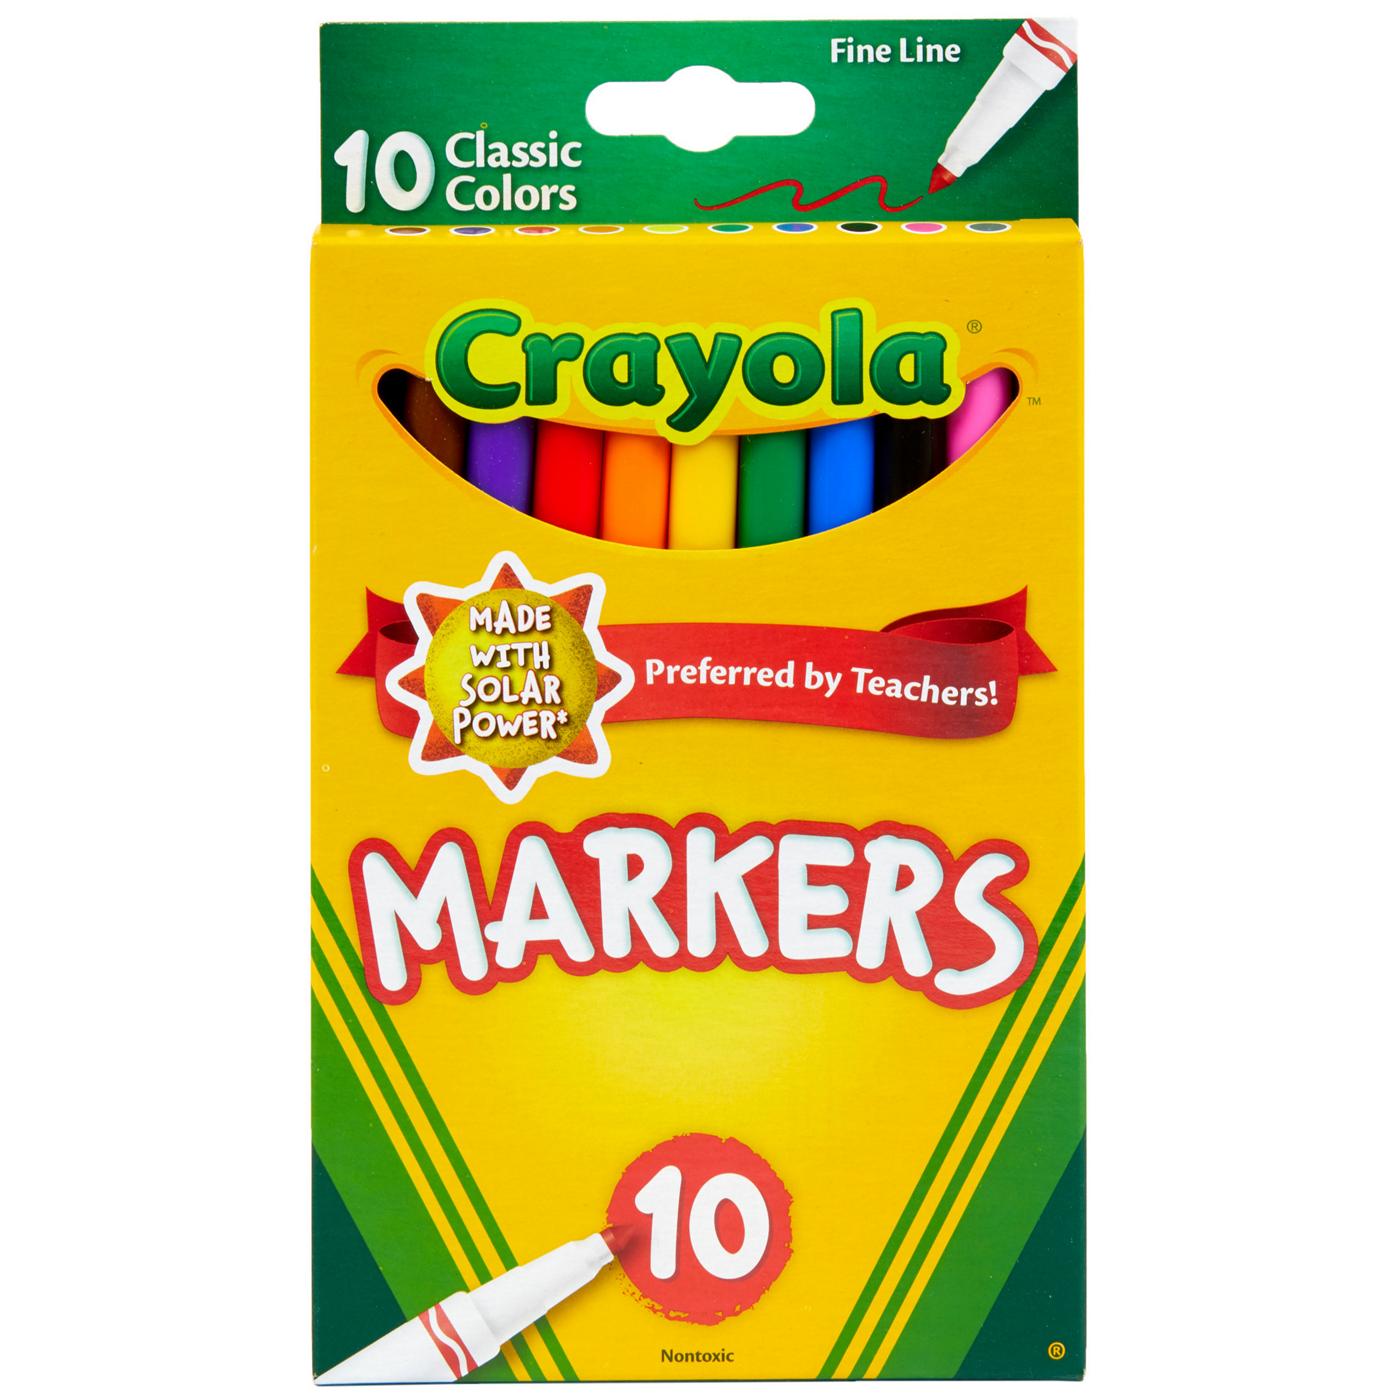 2-oz. Crayola® Classic Colors Washable Assorted Colors Kid's Paint